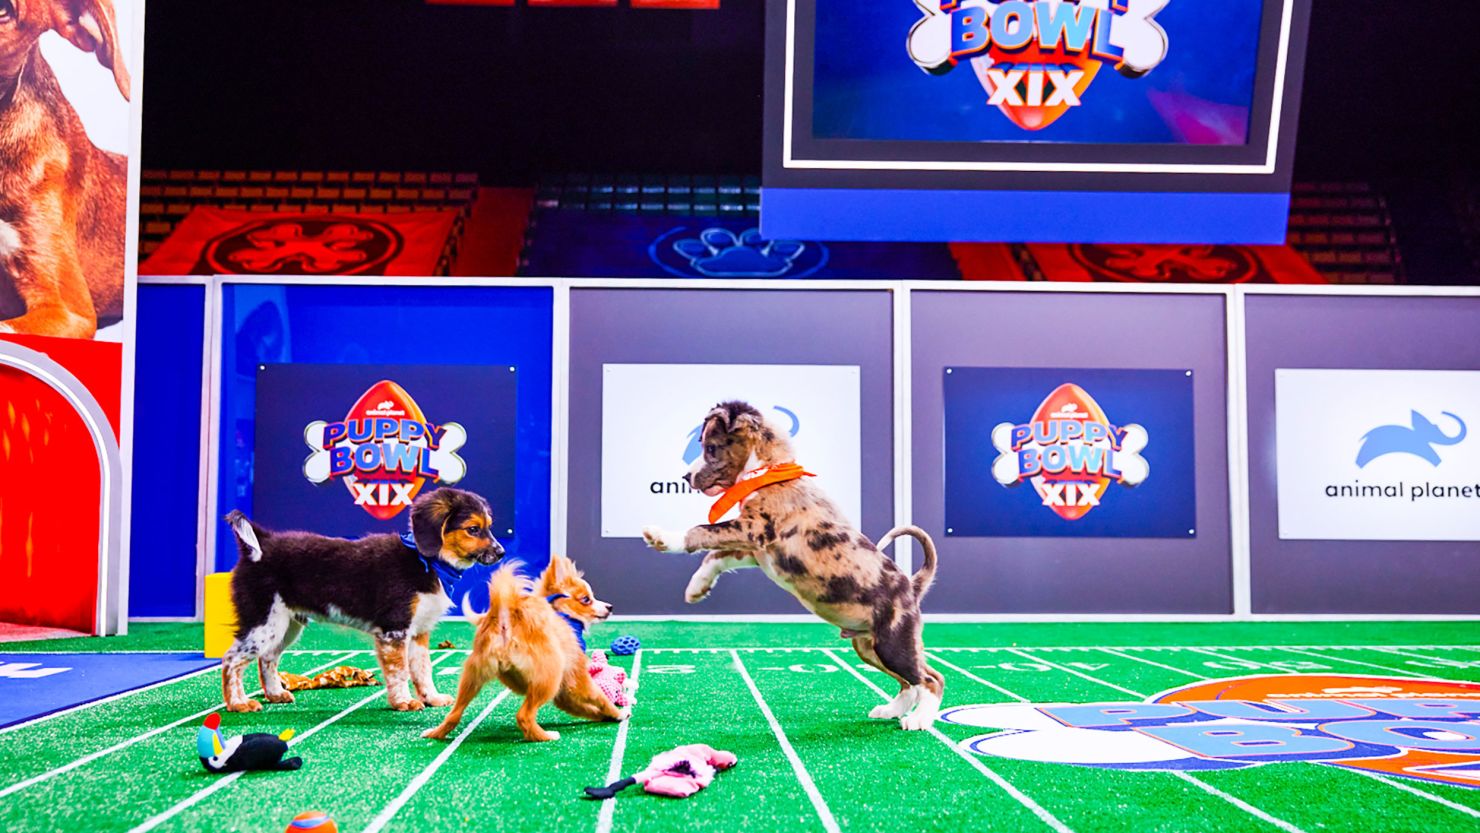 Animal Planet says every puppy and kitten ever featured on prior Puppy Bowls has found a home since the first show in 2005.